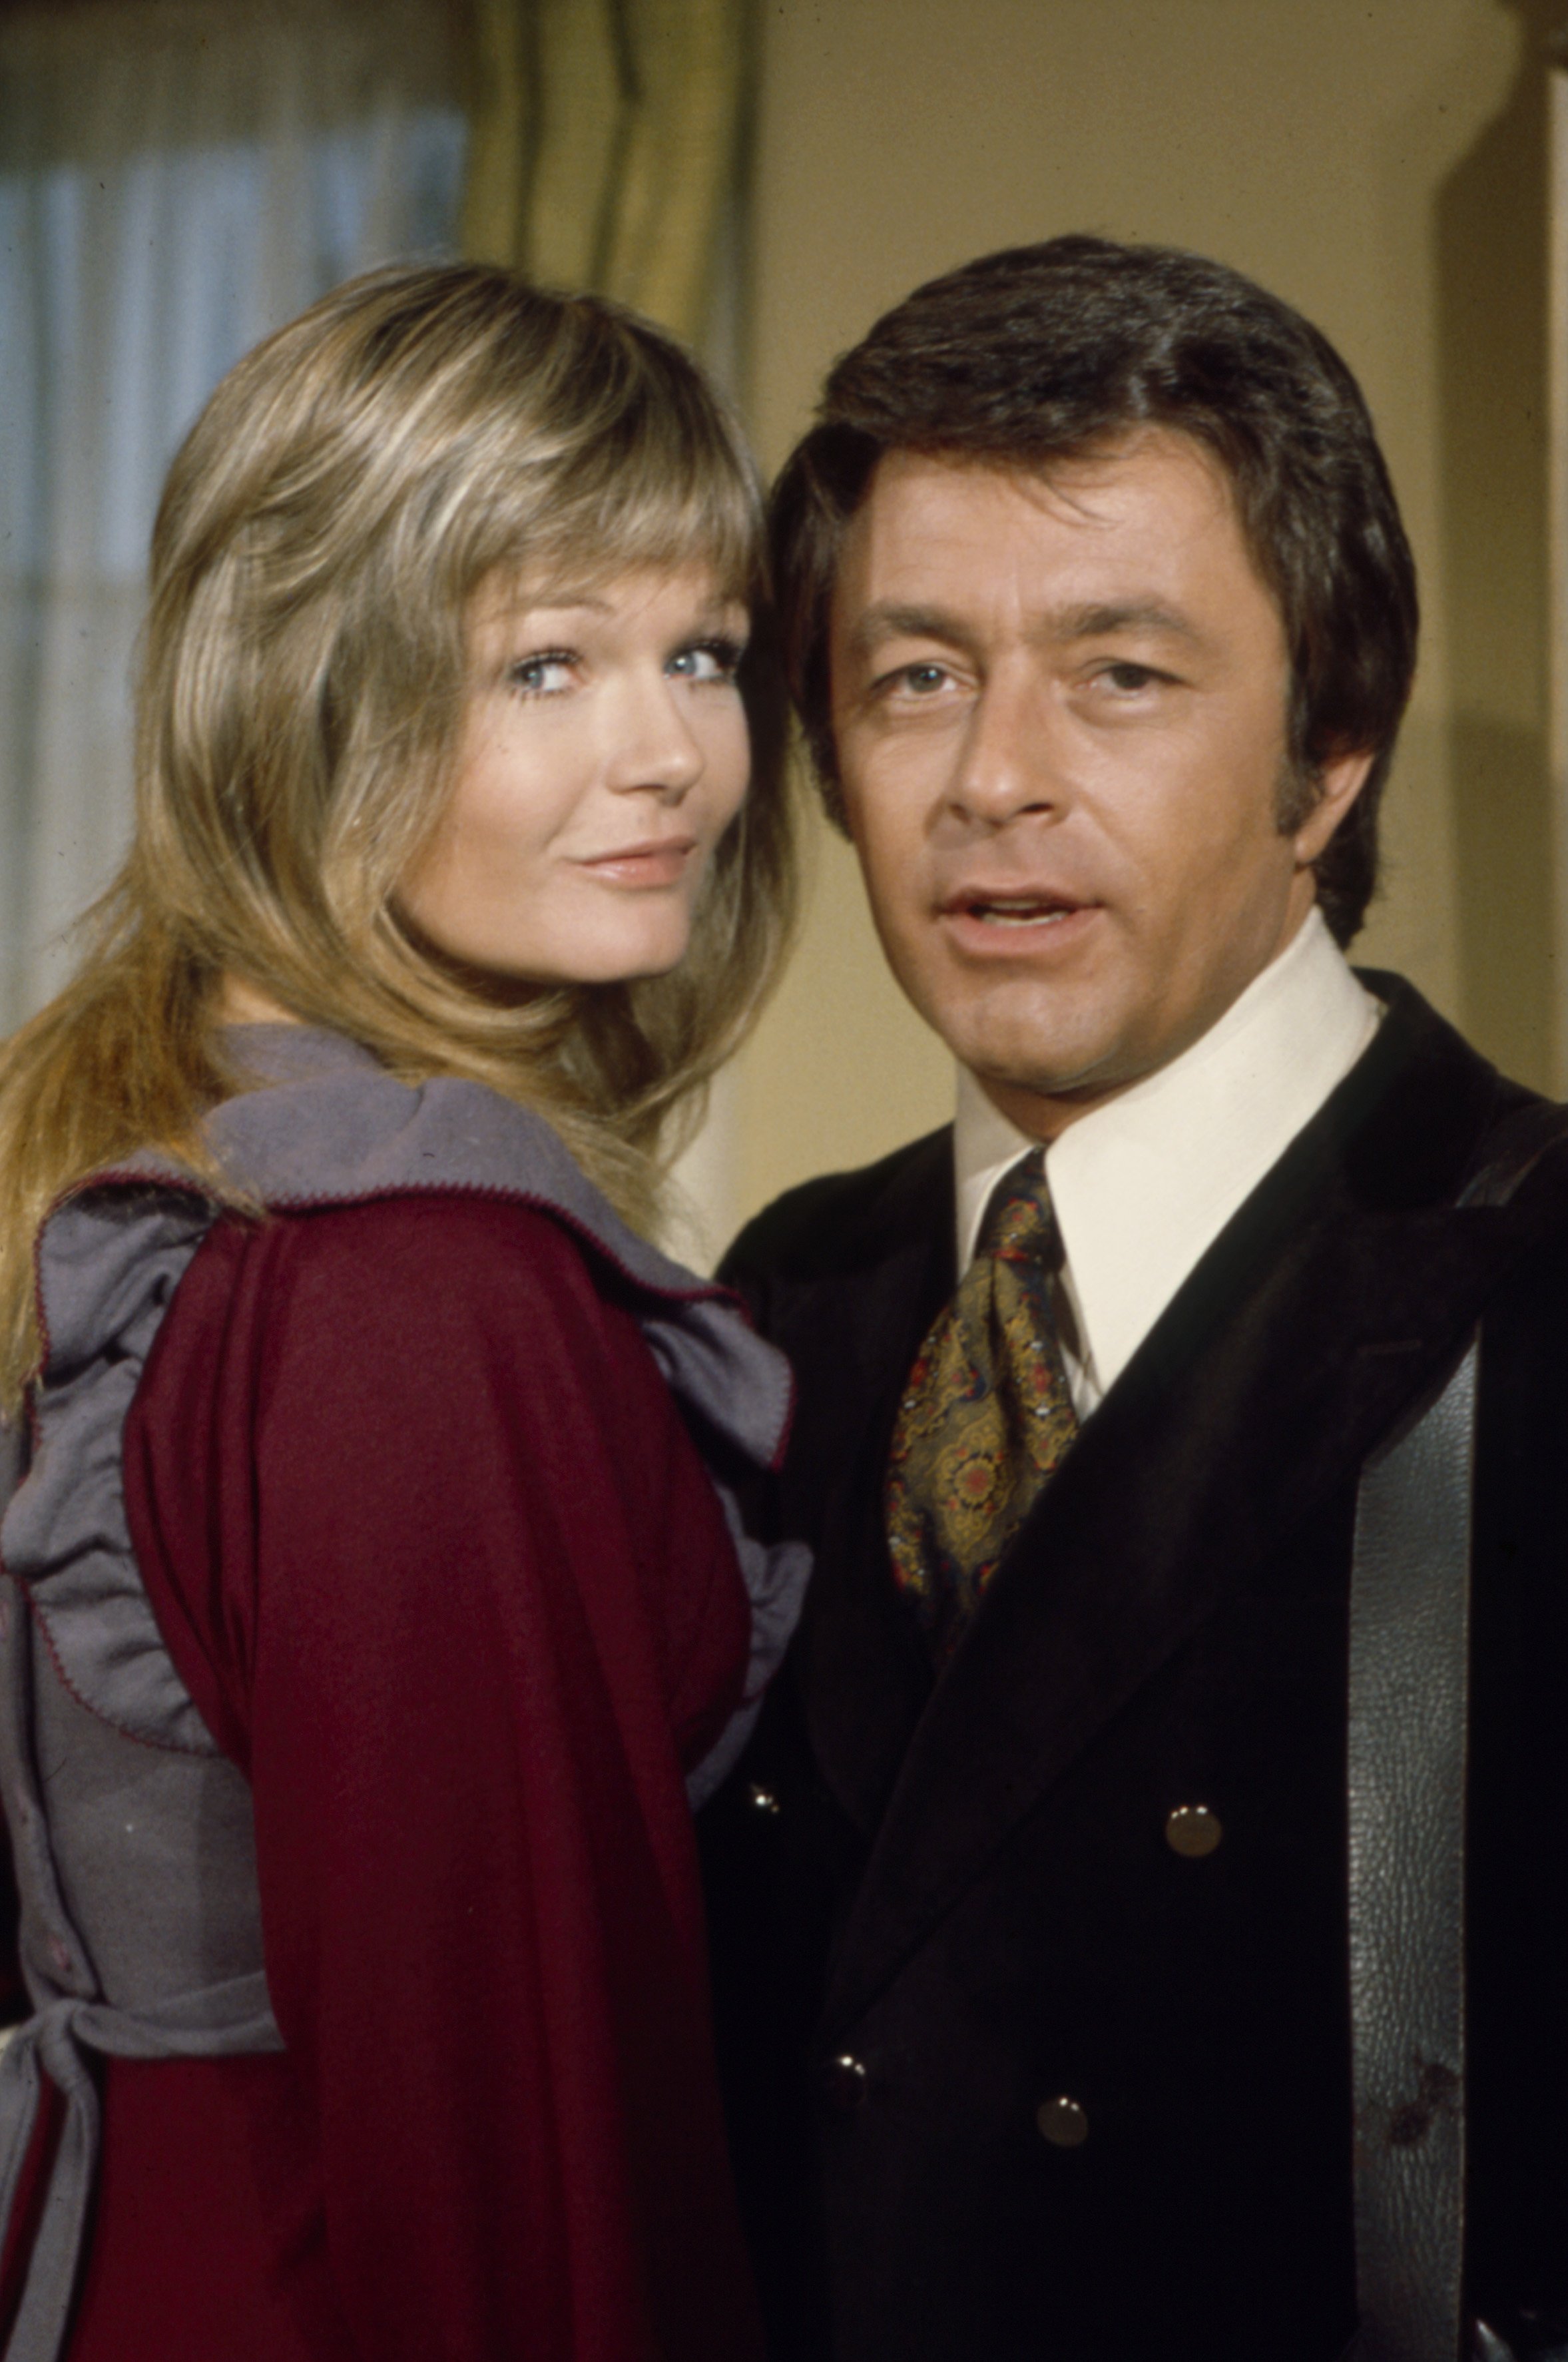 Valerie Perrine and Bill Bixby appearing in the Disney General Entertainment Content via Getty Images TV movie 'The Couple Takes a Wife'. | Source: Getty Images